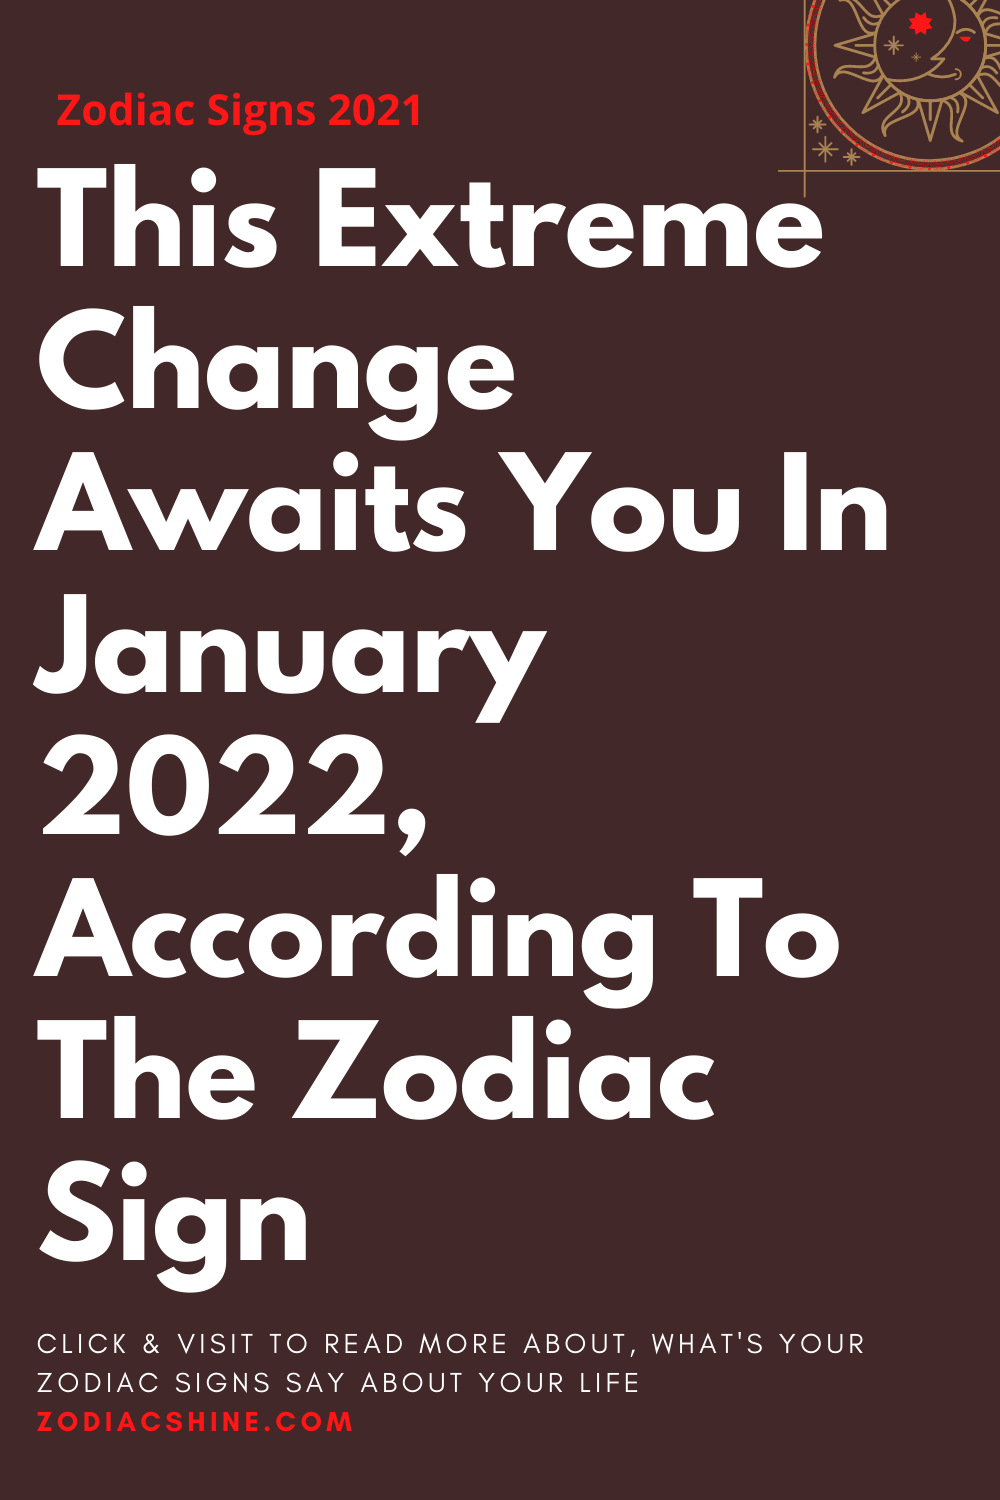 This Extreme Change Awaits You In January 2022 According To The Zodiac Sign